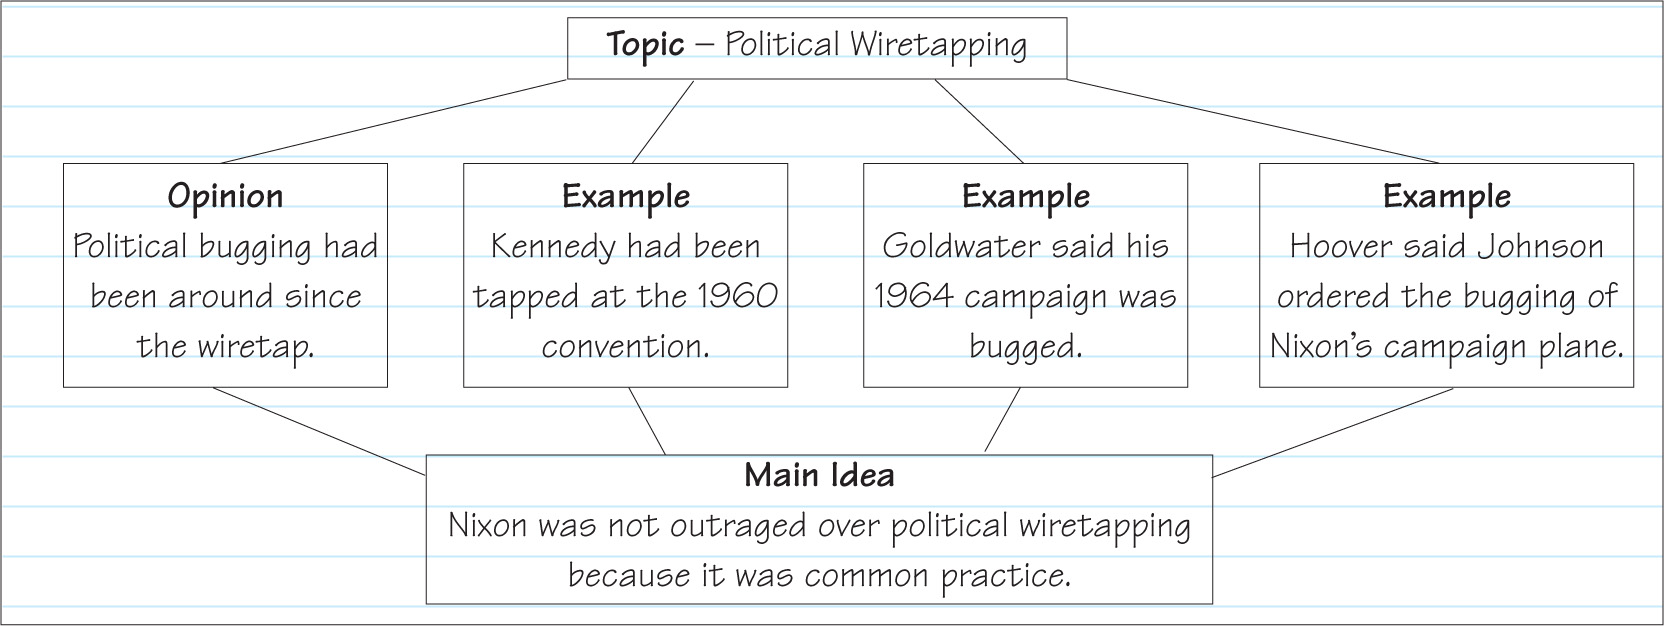 A chart on the topic of political wiretapping.